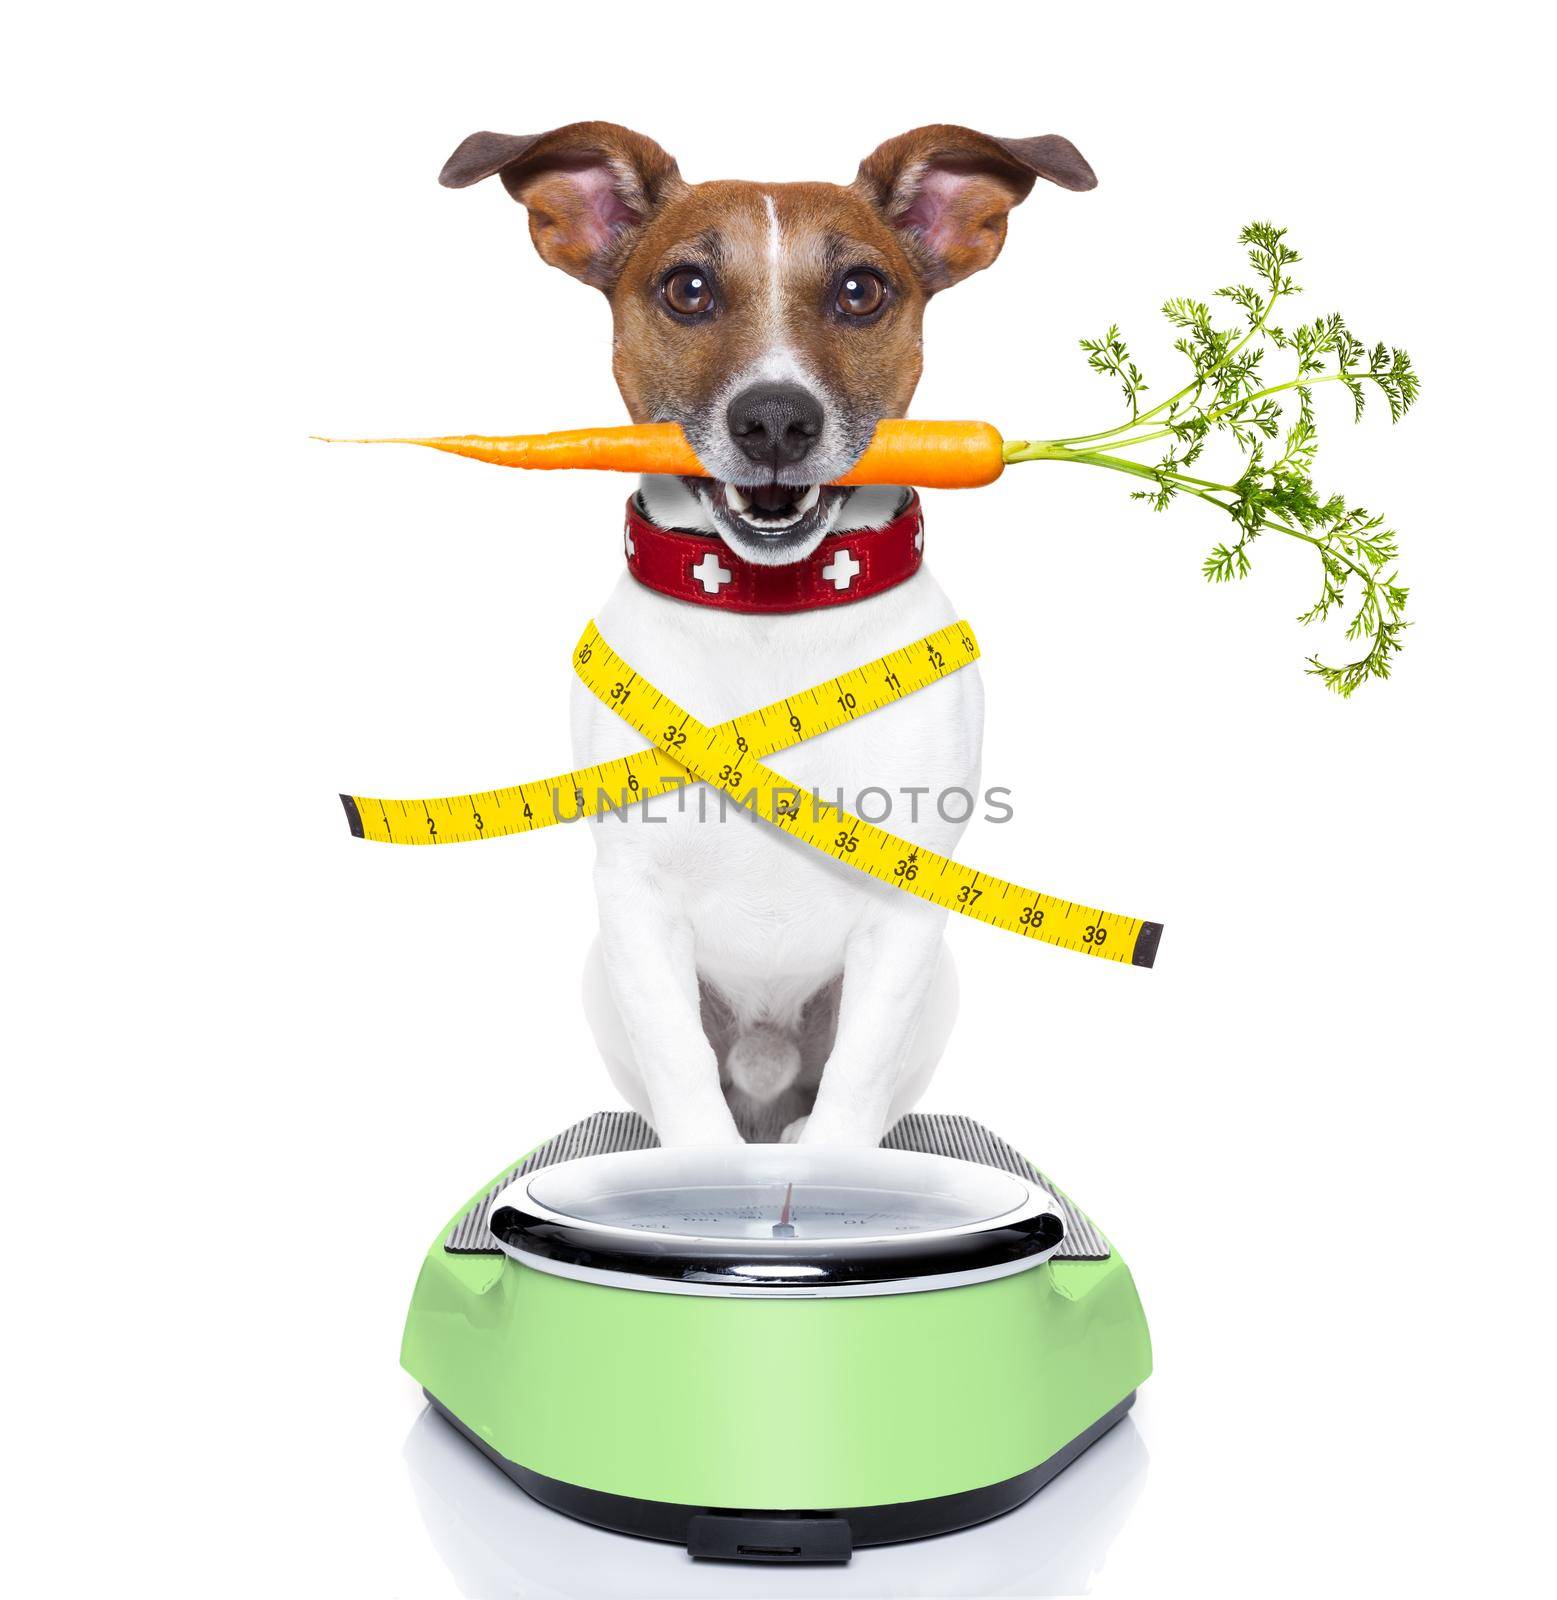 healthy dog on scale with carrot in mouth and measuring tape around waist isolated on white background